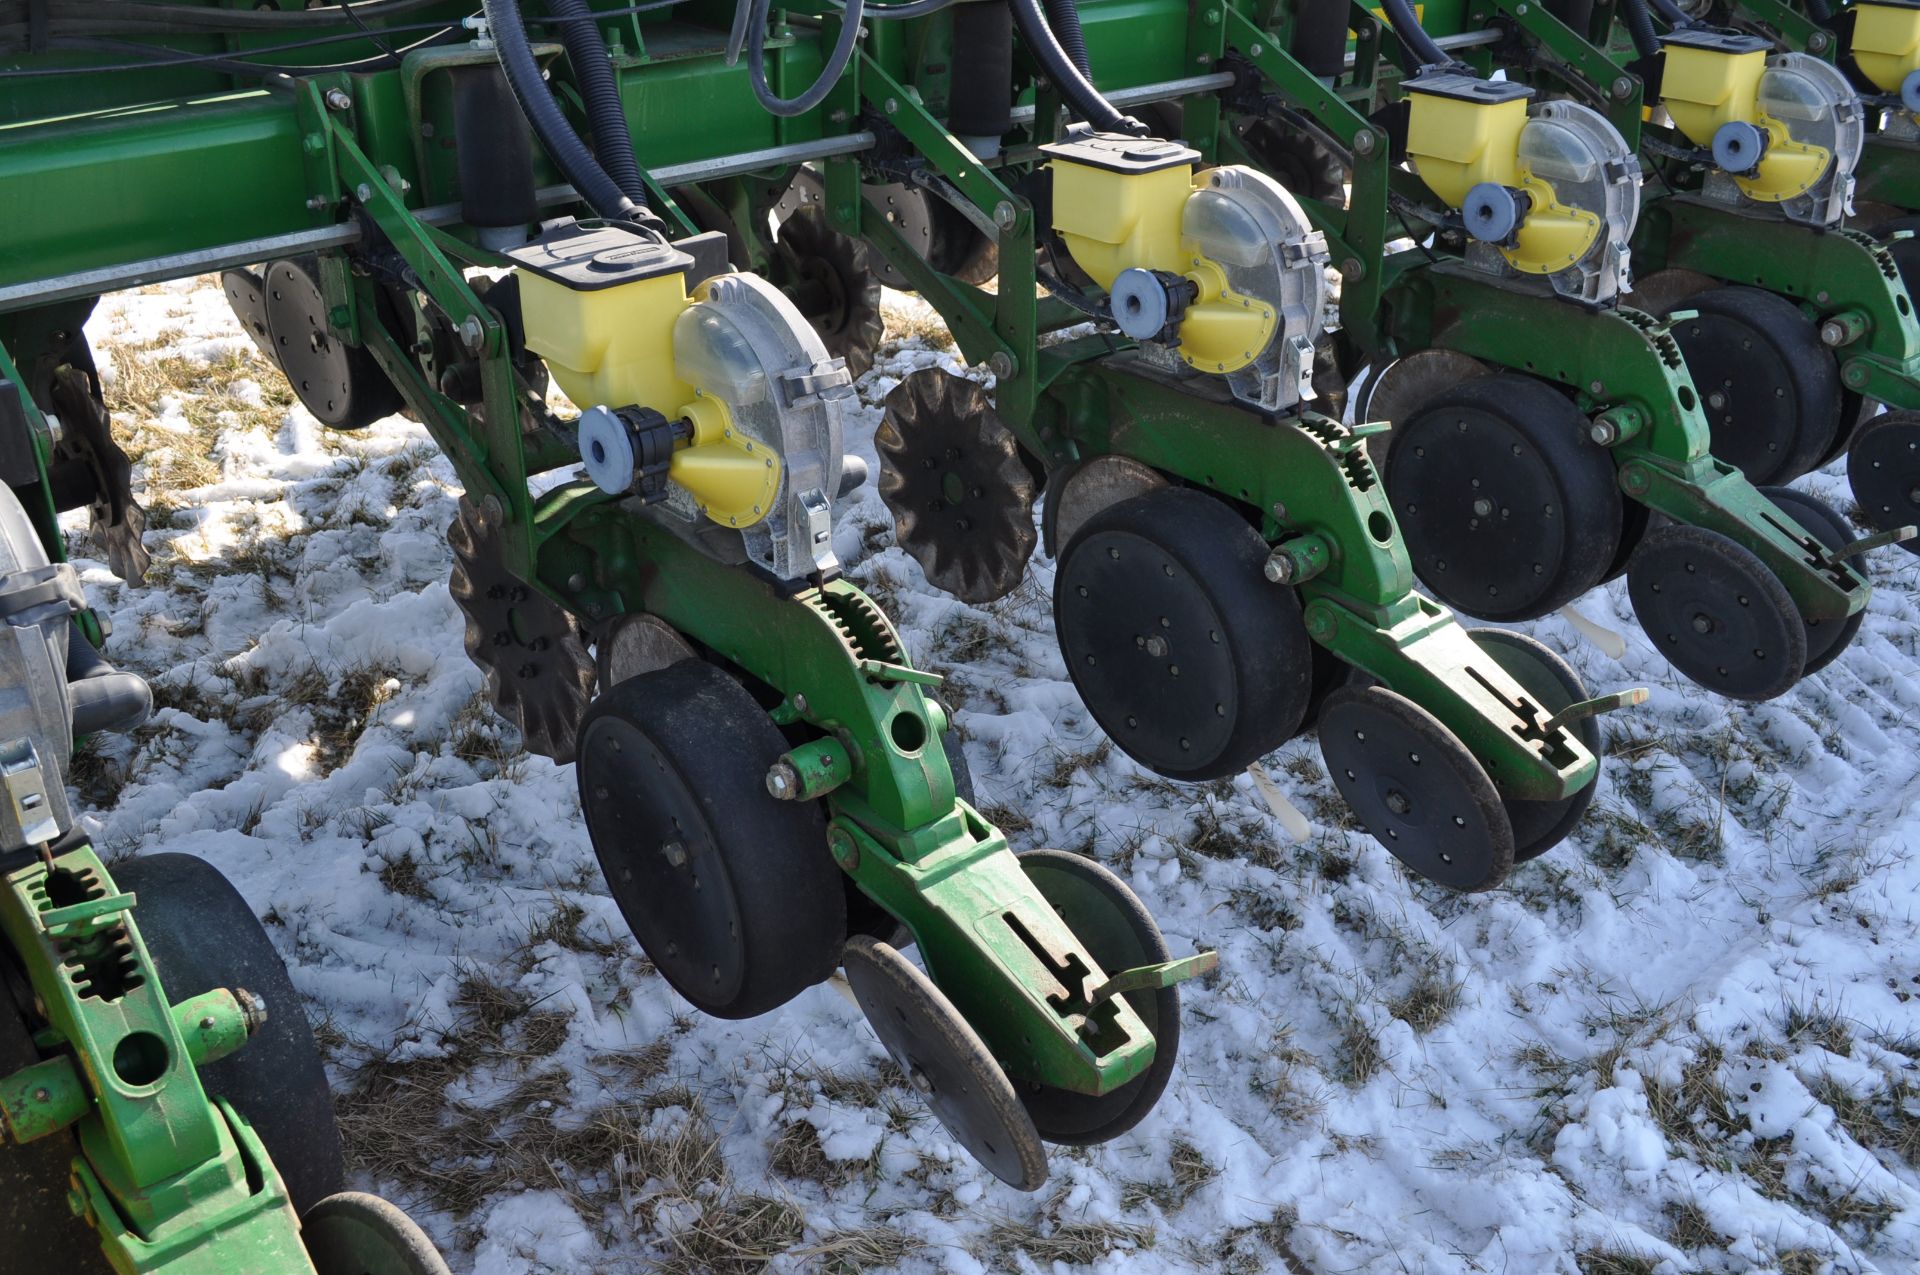 John Deere 1770 NT 24 row 30” planter, front fold, CCS, Refuge Plus tank, markers, no-till coulters, - Image 12 of 25